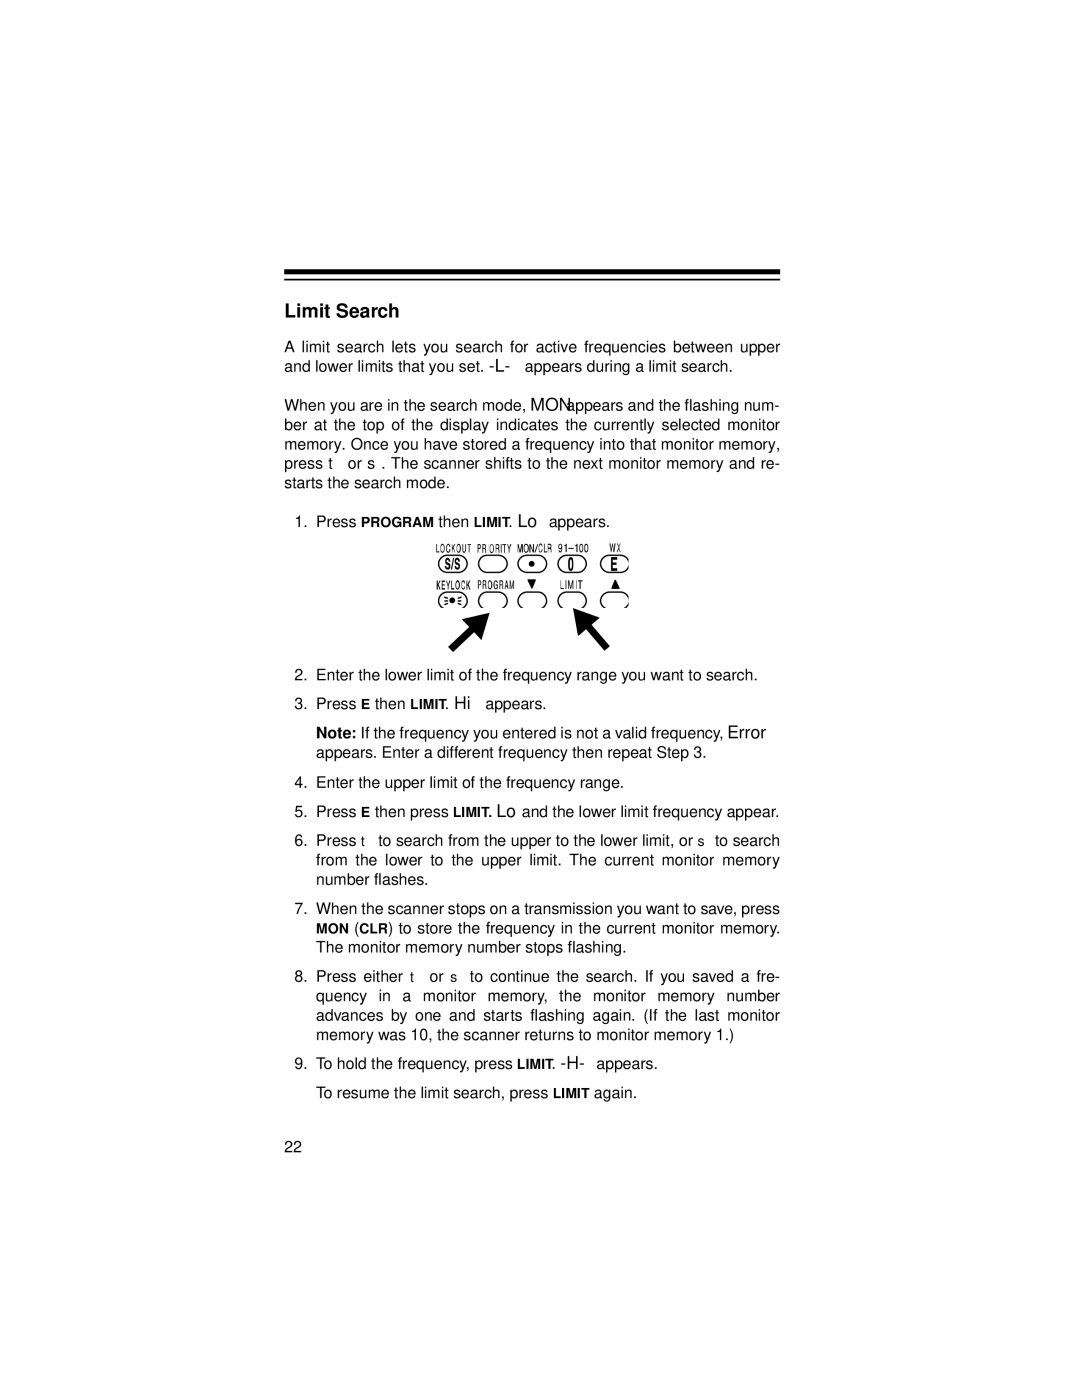 Radio Shack Pro-71 owner manual Limit Search 